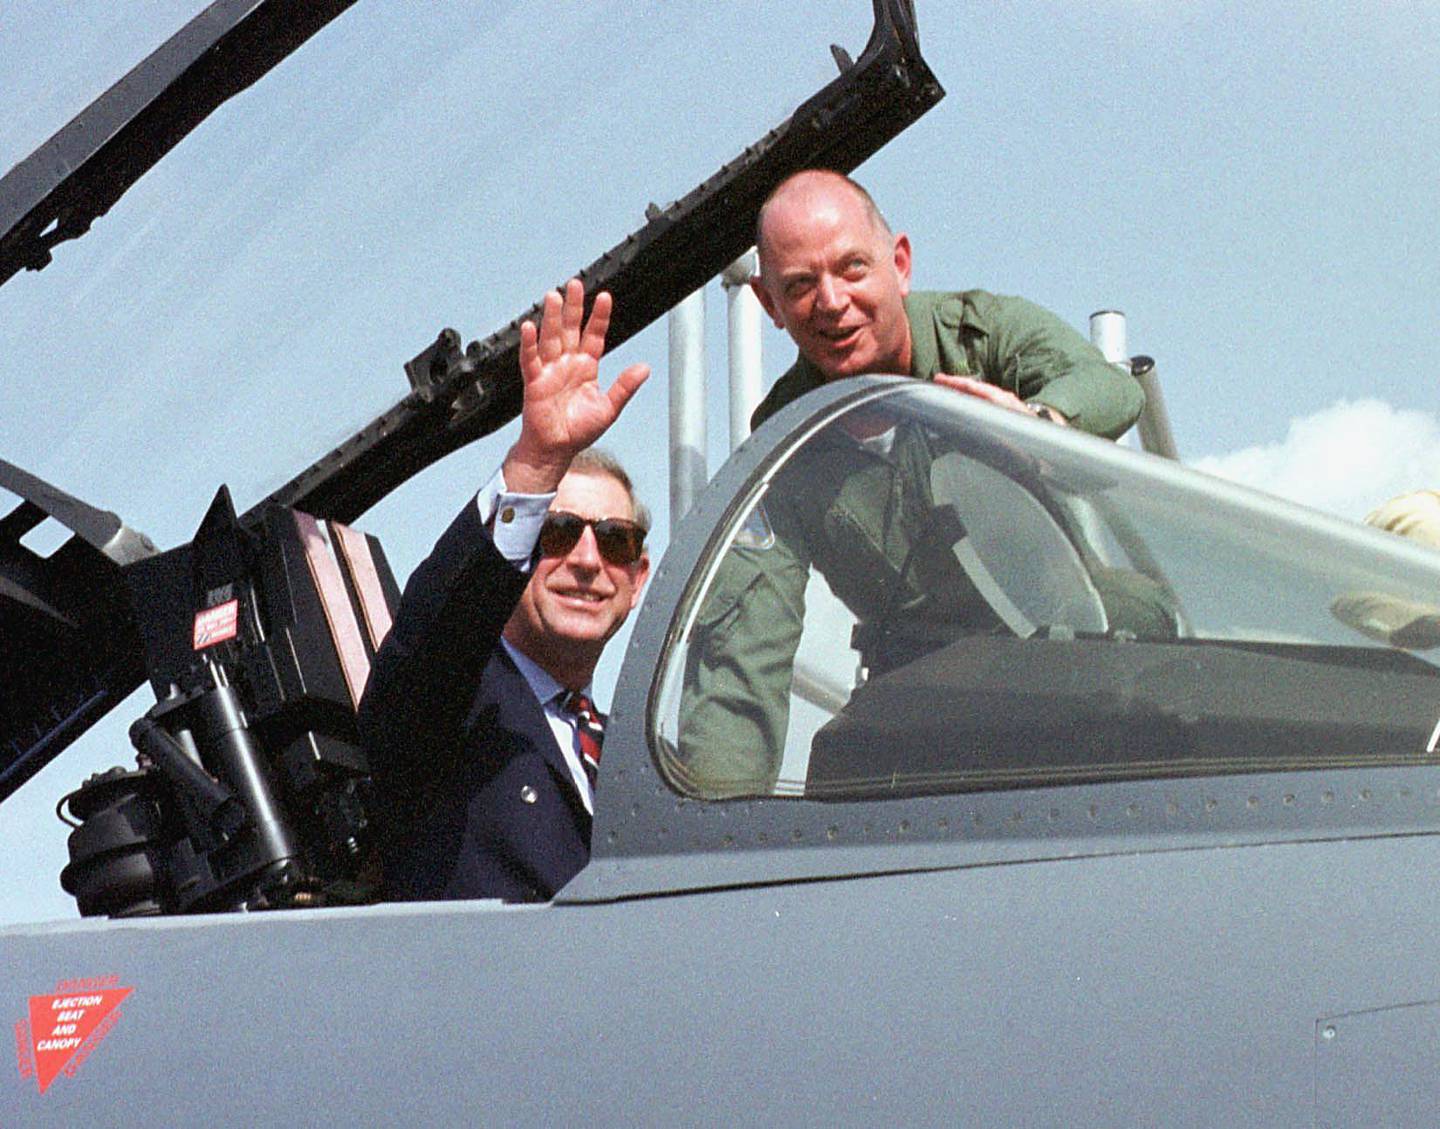 Prince Charles at the Dubai Airshow in 1999. AFP